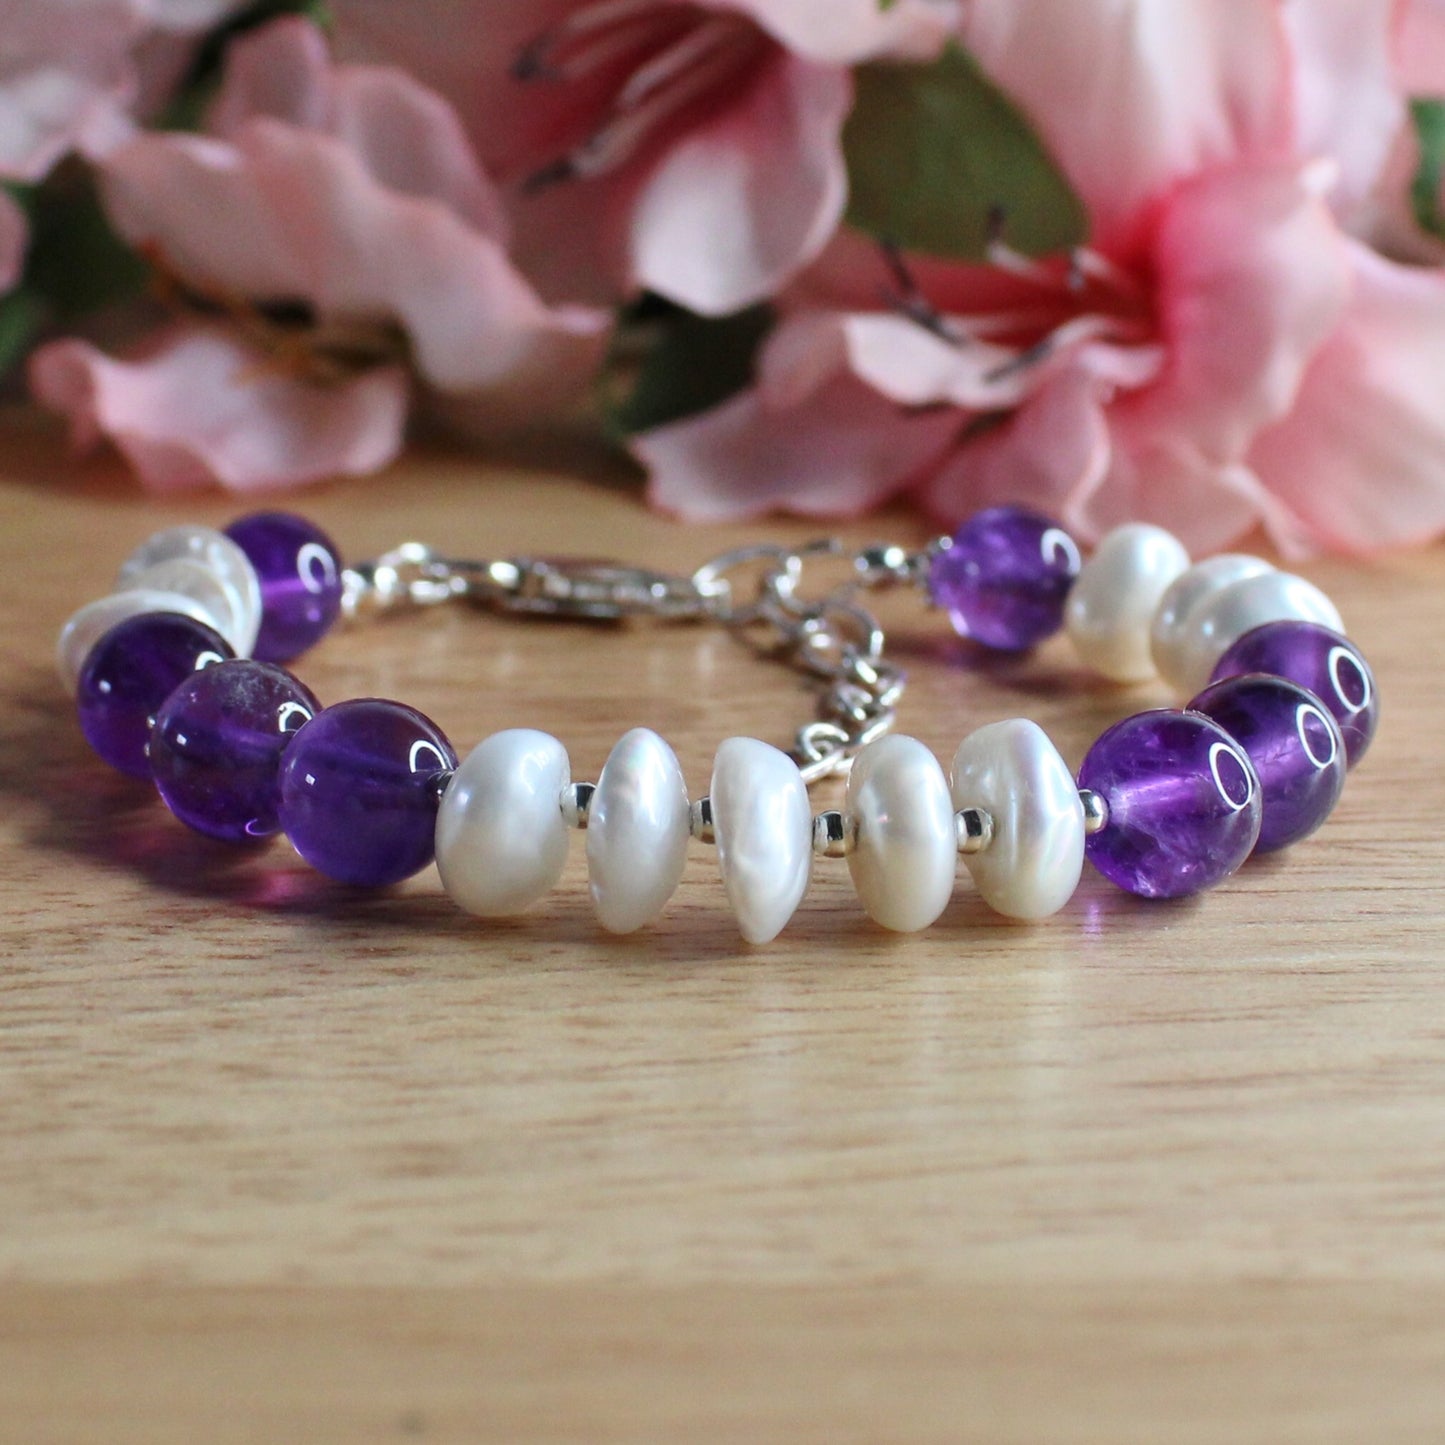 deep purple amethyst round gemstone beads, soft white keishi pearls, sterling silver lobster clasp, extender chain, beads